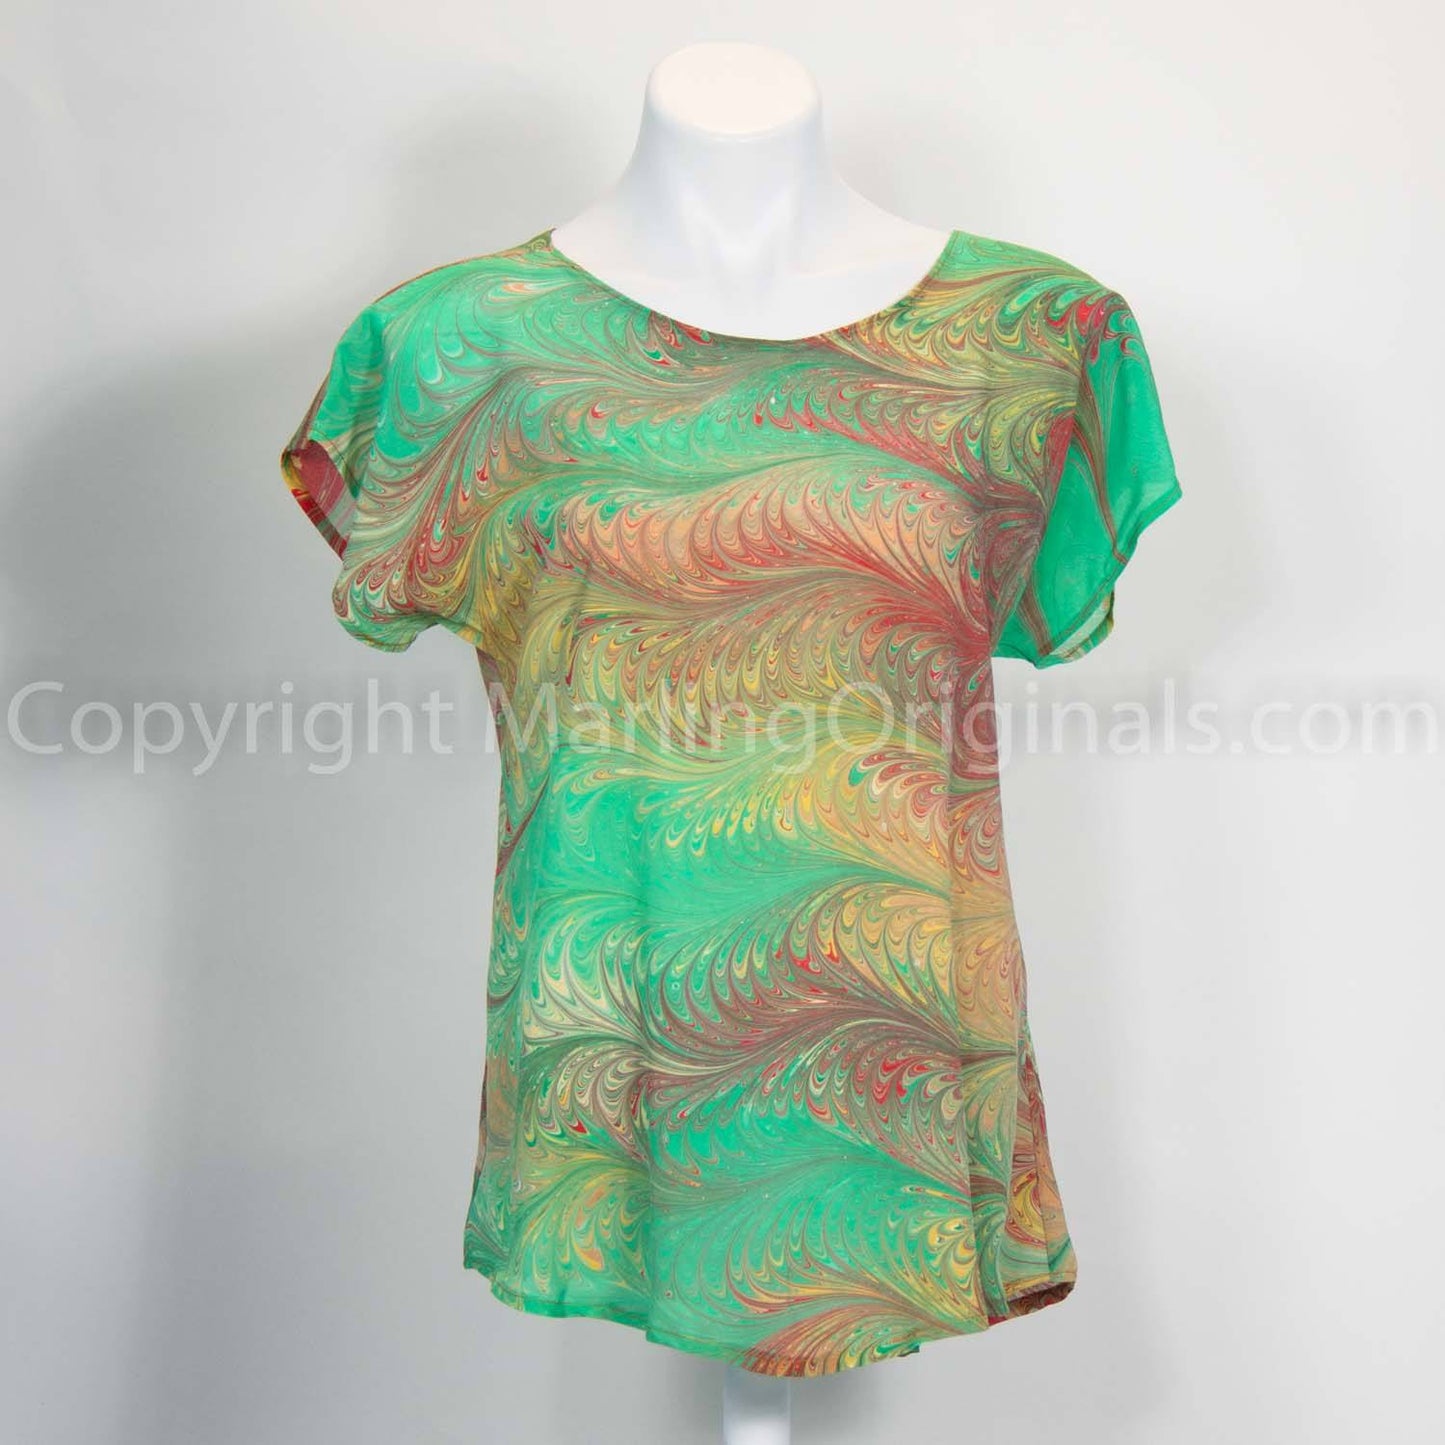 Marbled silk short sleeve top in spring green, sienna, red and gold feathered pattern.  Round neck